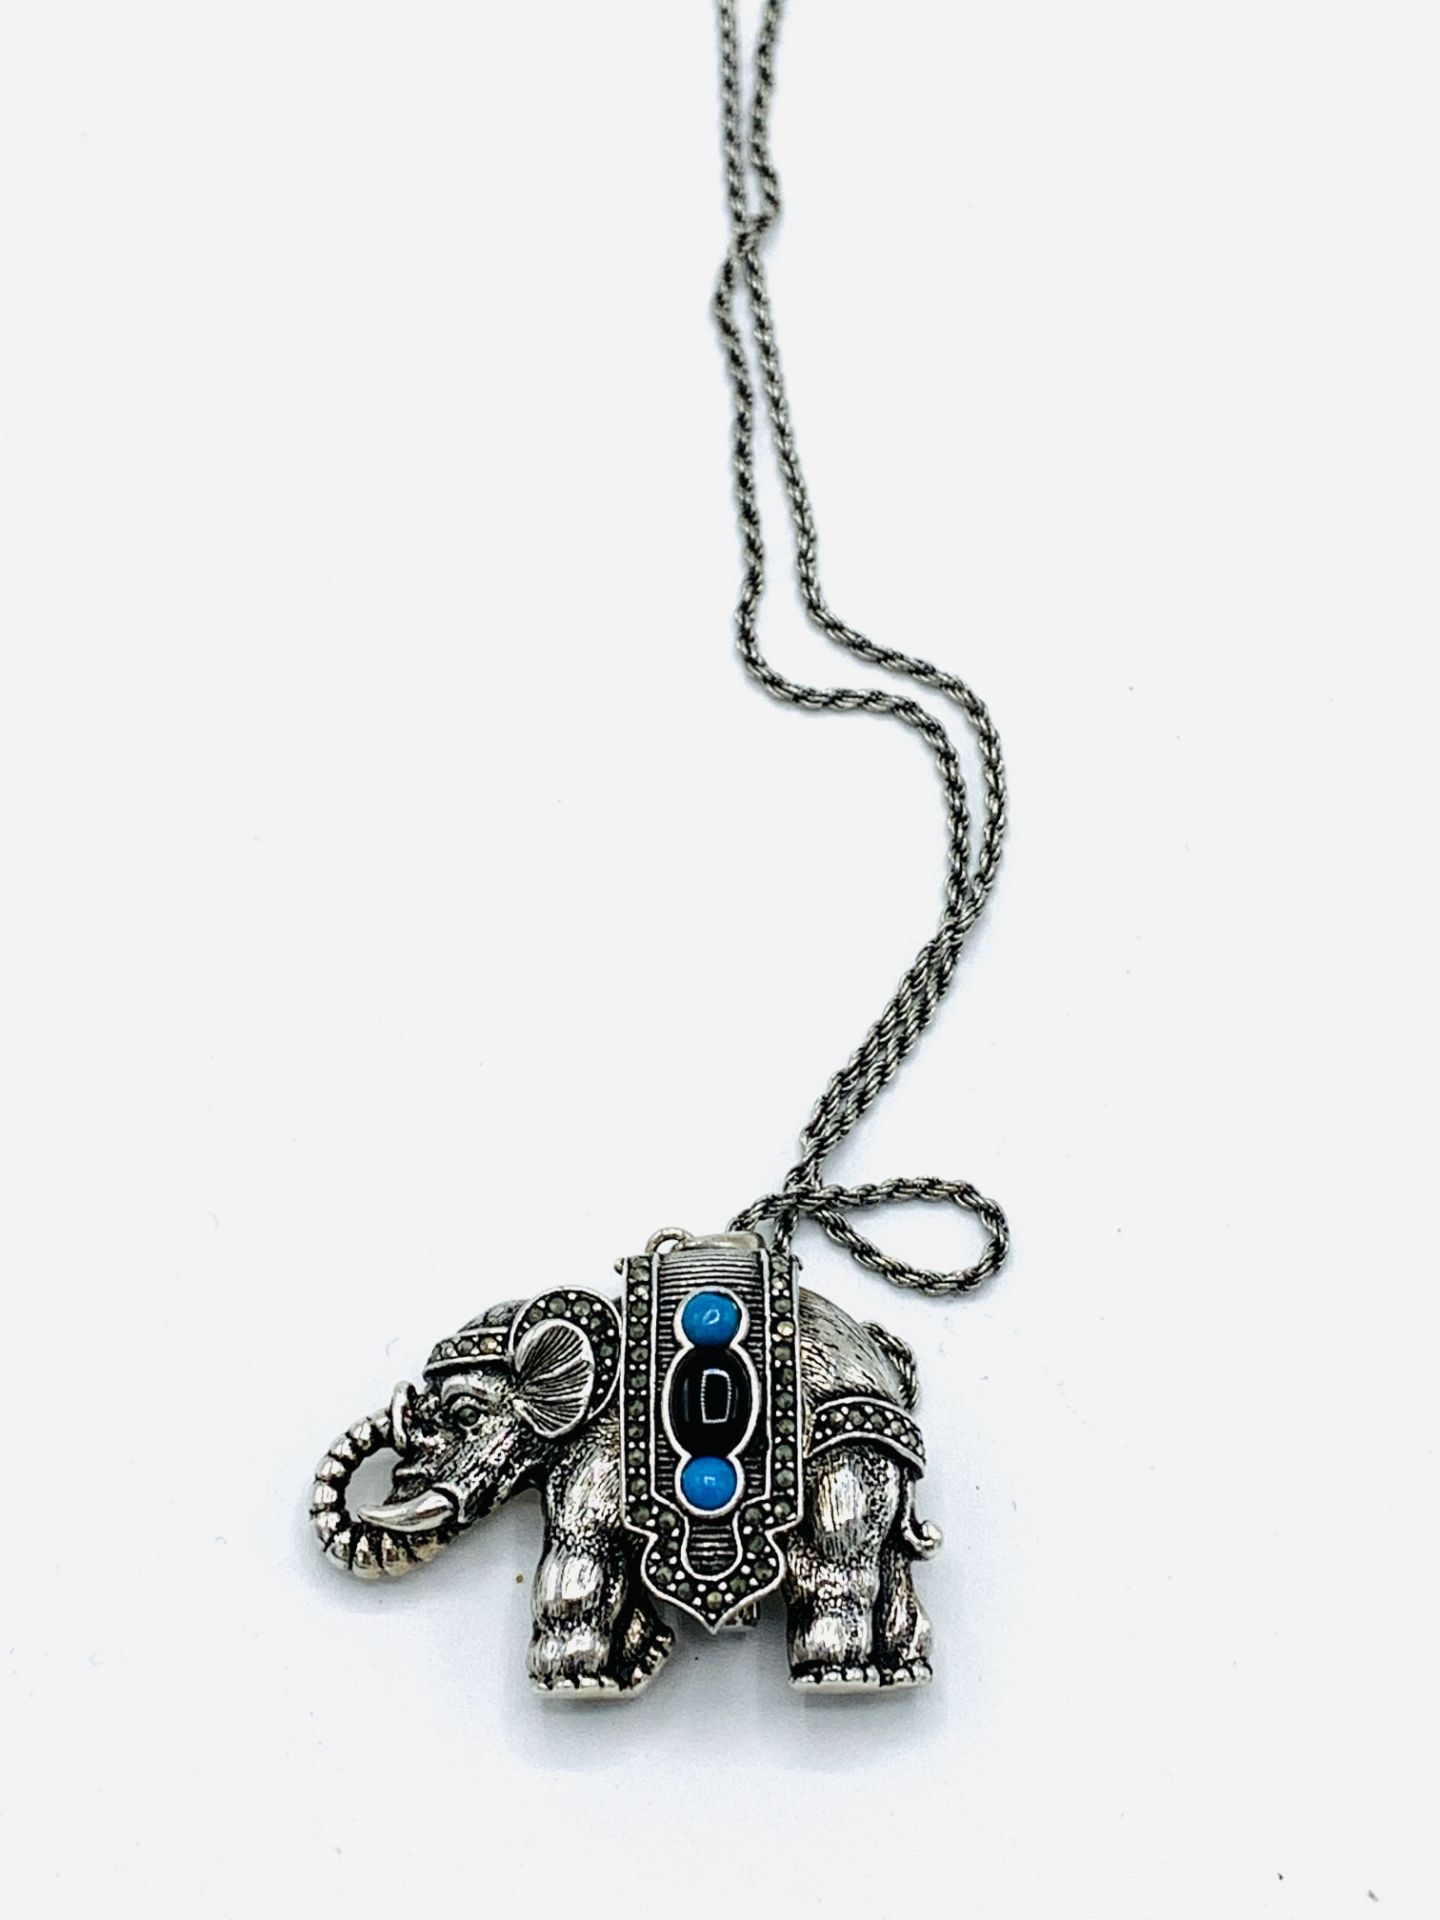 Sterling silver elephant watch pendant on a 925 silver chain - Image 2 of 3